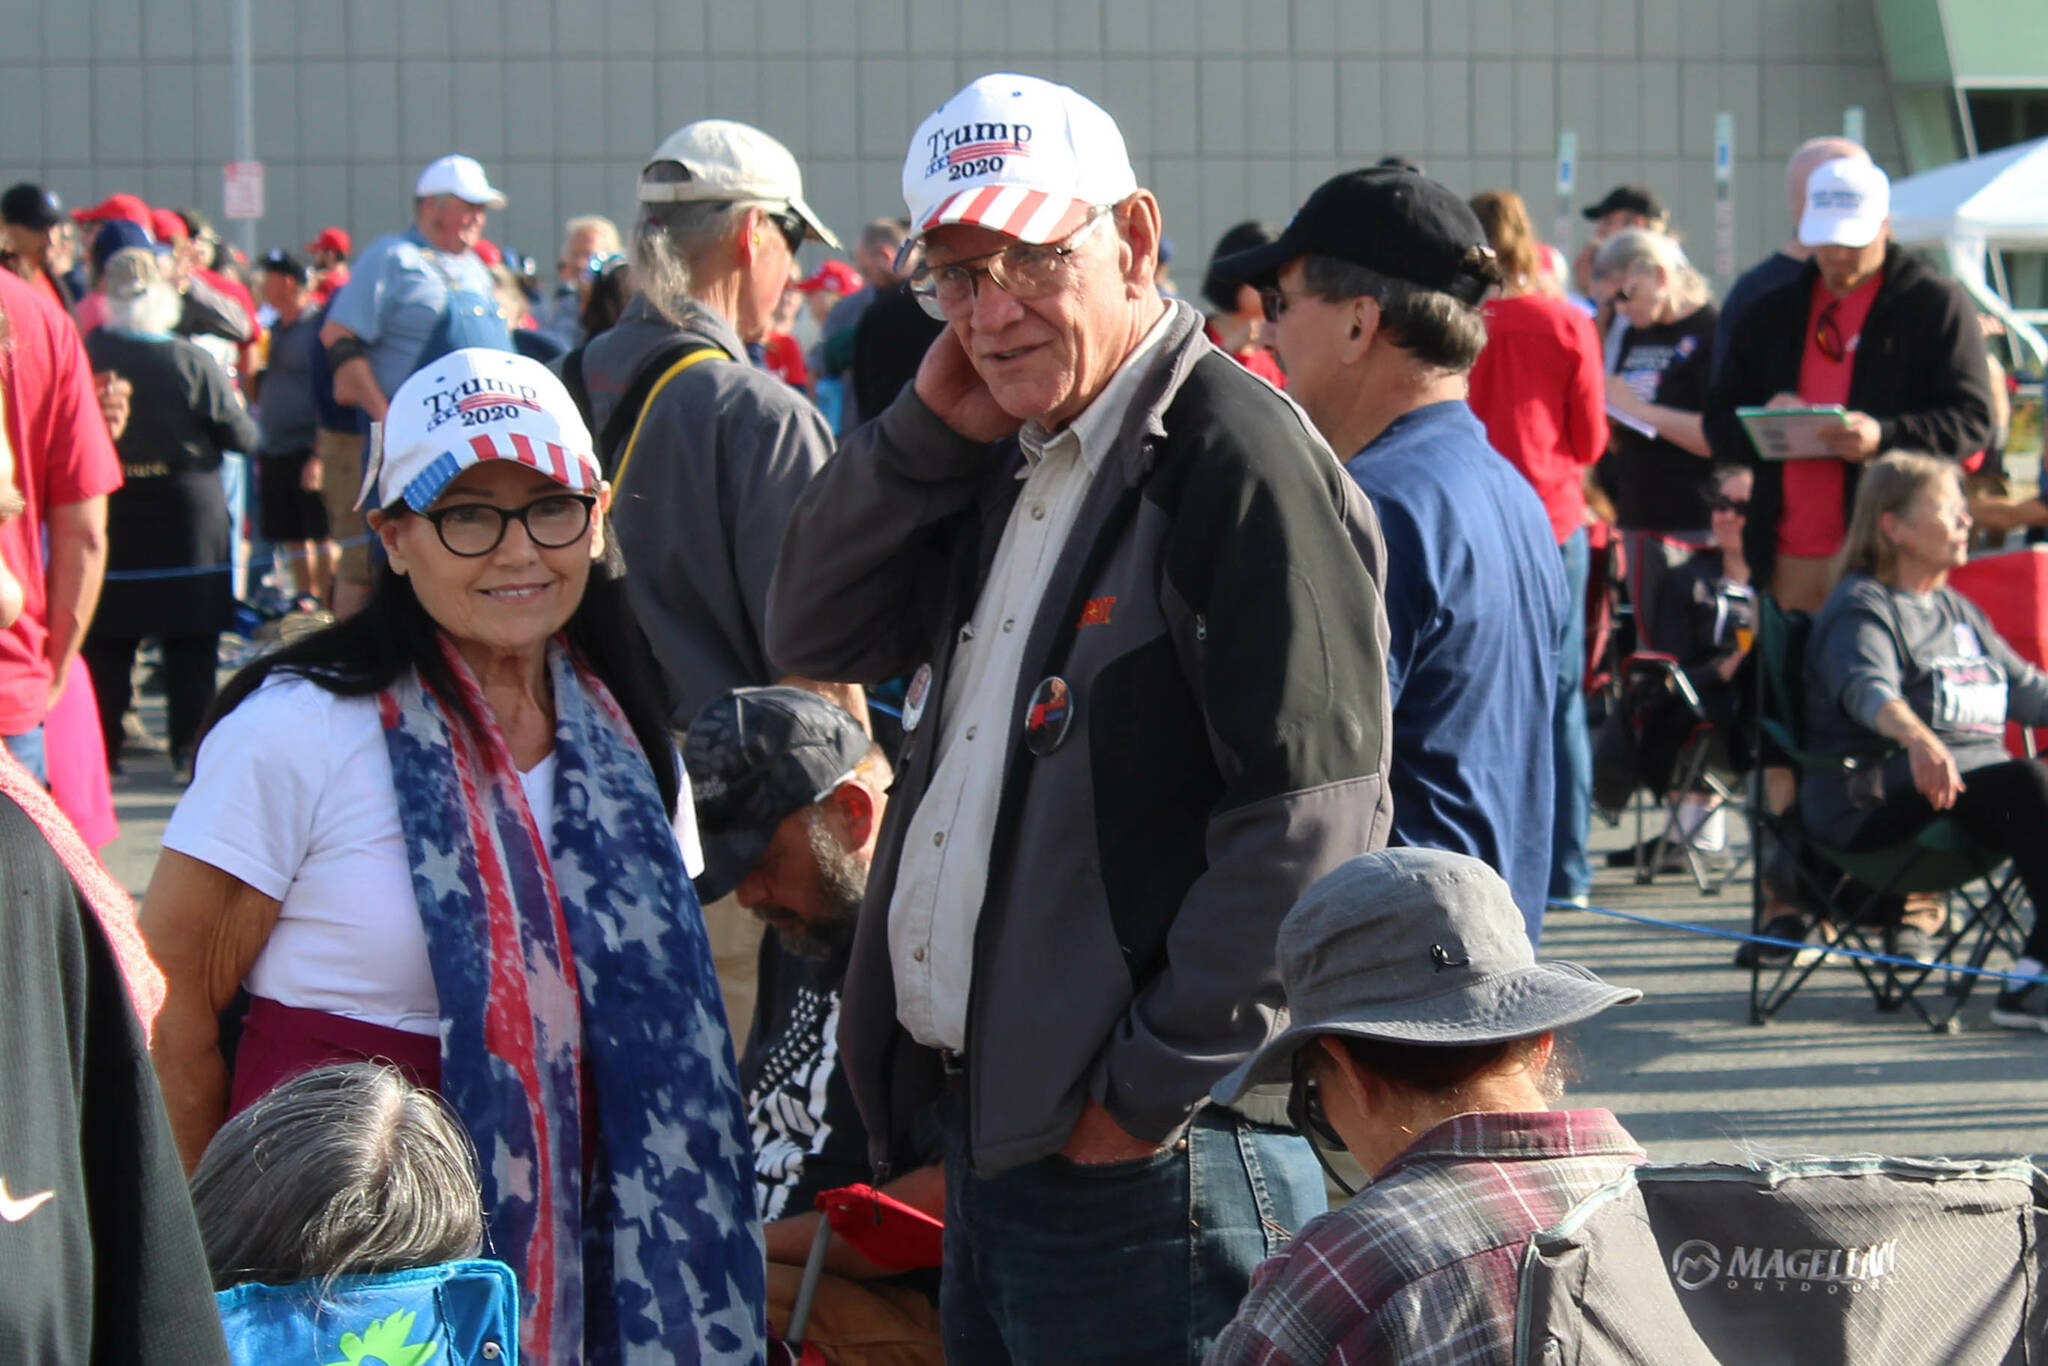 Mike (left) and Kathy (right) Medcoff wait to enter the Alaska Airlines Center for a Save America rally on Saturday, July 9, 2022, in Anchorage, Alaska. Former President Donald Trump, U.S. Senate candidate Kelly Tshibaka and U.S. House candidate Sarah Palin were among the events speakers. (Ashlyn O’Hara/Peninsula Clarion)